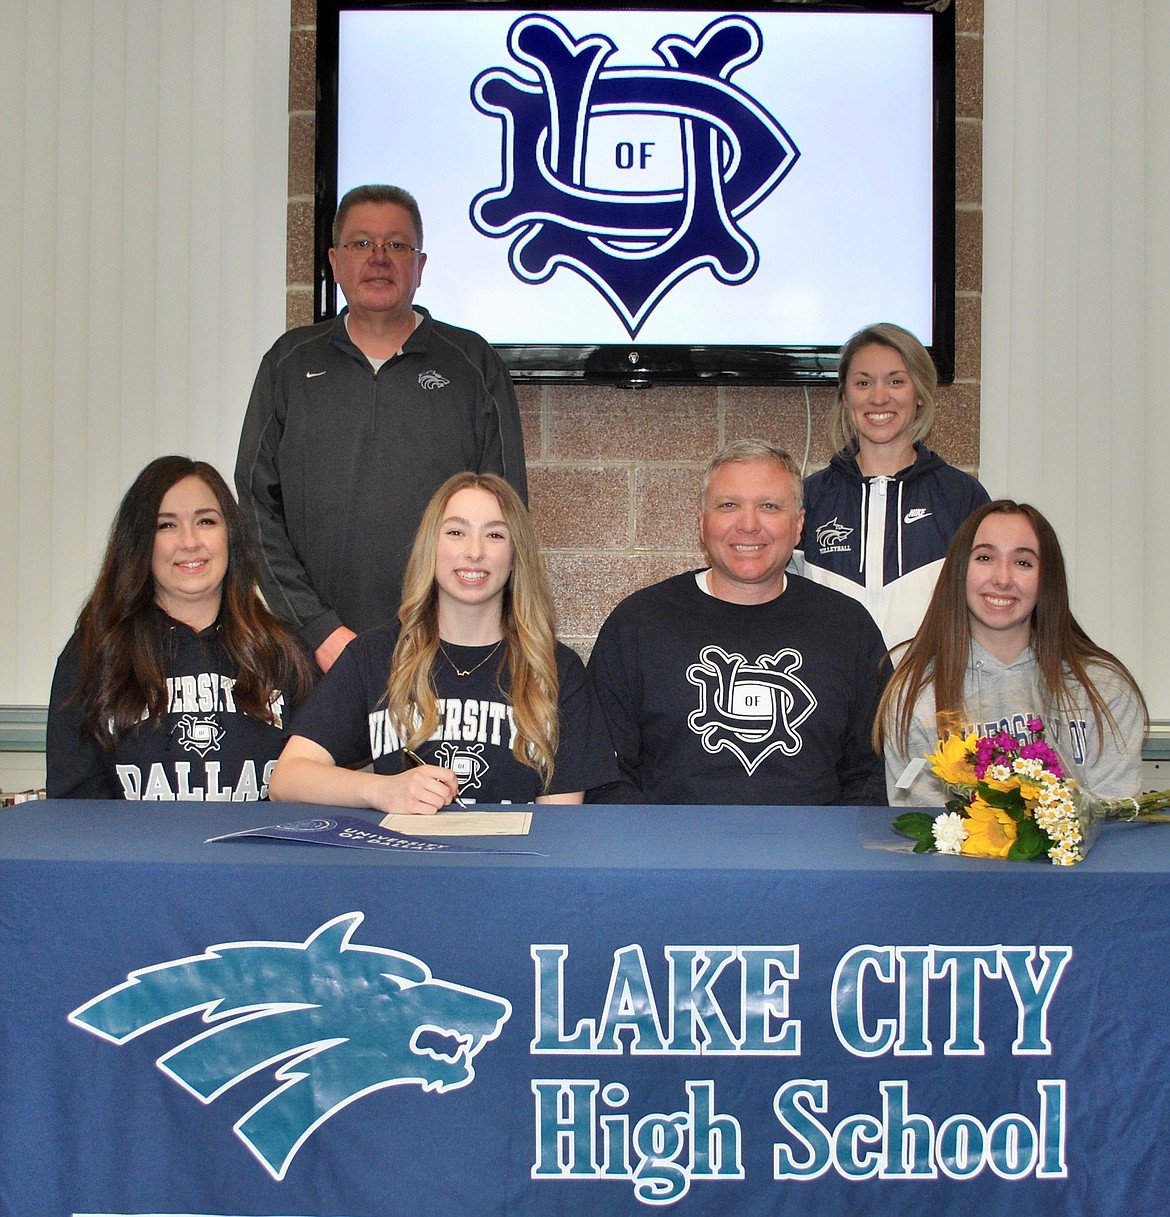 Courtesy photo
Lake City High senior Alissa Stennett recently signed a letter of intent to play volleyball at NCAA Division III University of Dallas in Irving, Texas. Seated from left is Amy Stennett (mom), Alissa Stennett, Jess Stennett (dad) and Aubrey Stennett (sister); and standing from left, Jim Winger, Lake City High athletic director; and Michelle Kleinberg, Lake City High volleyball coach.